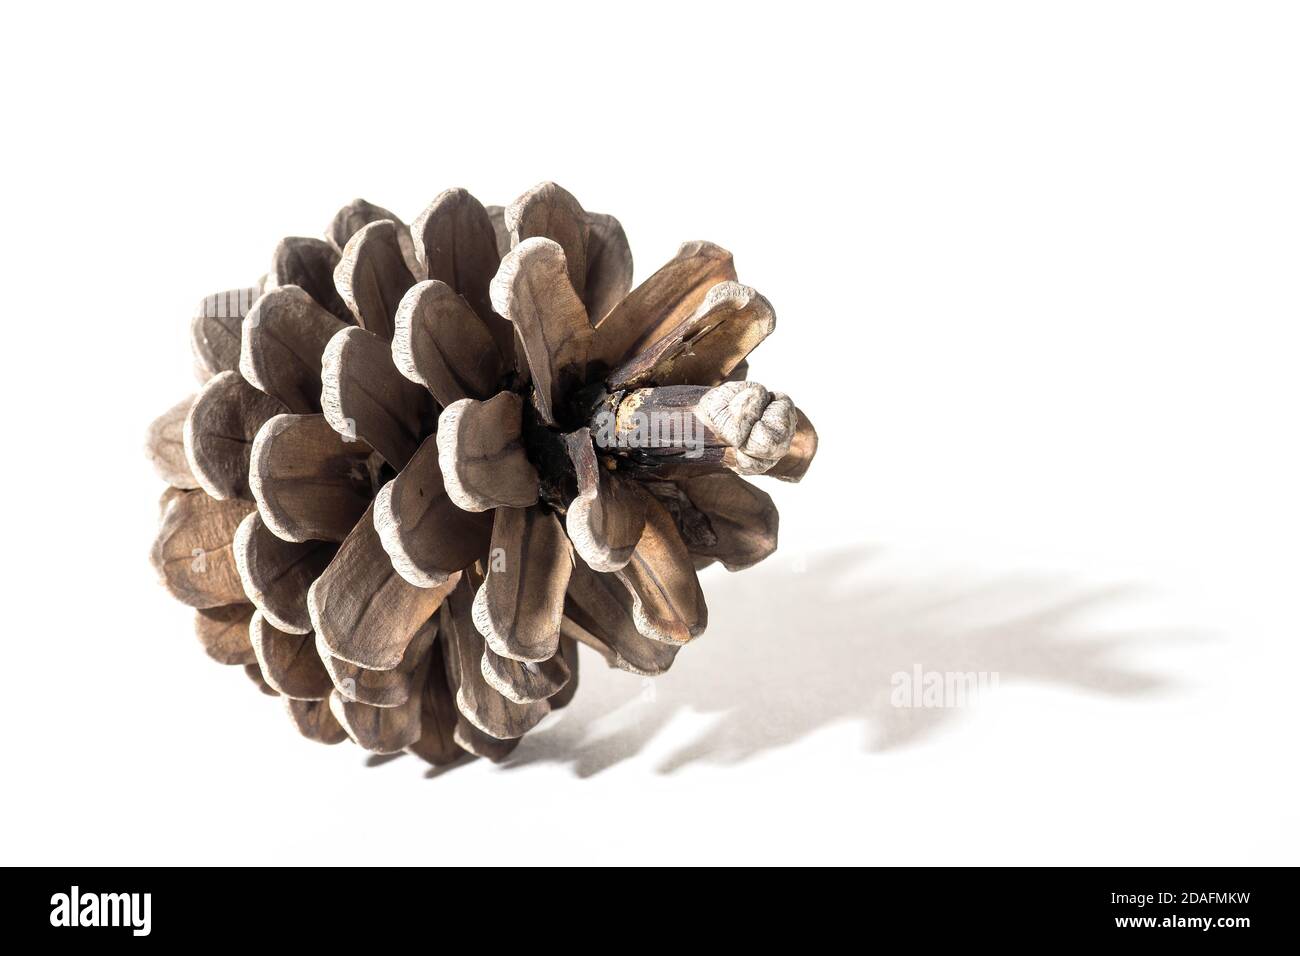 Pine cone on white background, side view, selective focus Stock Photo